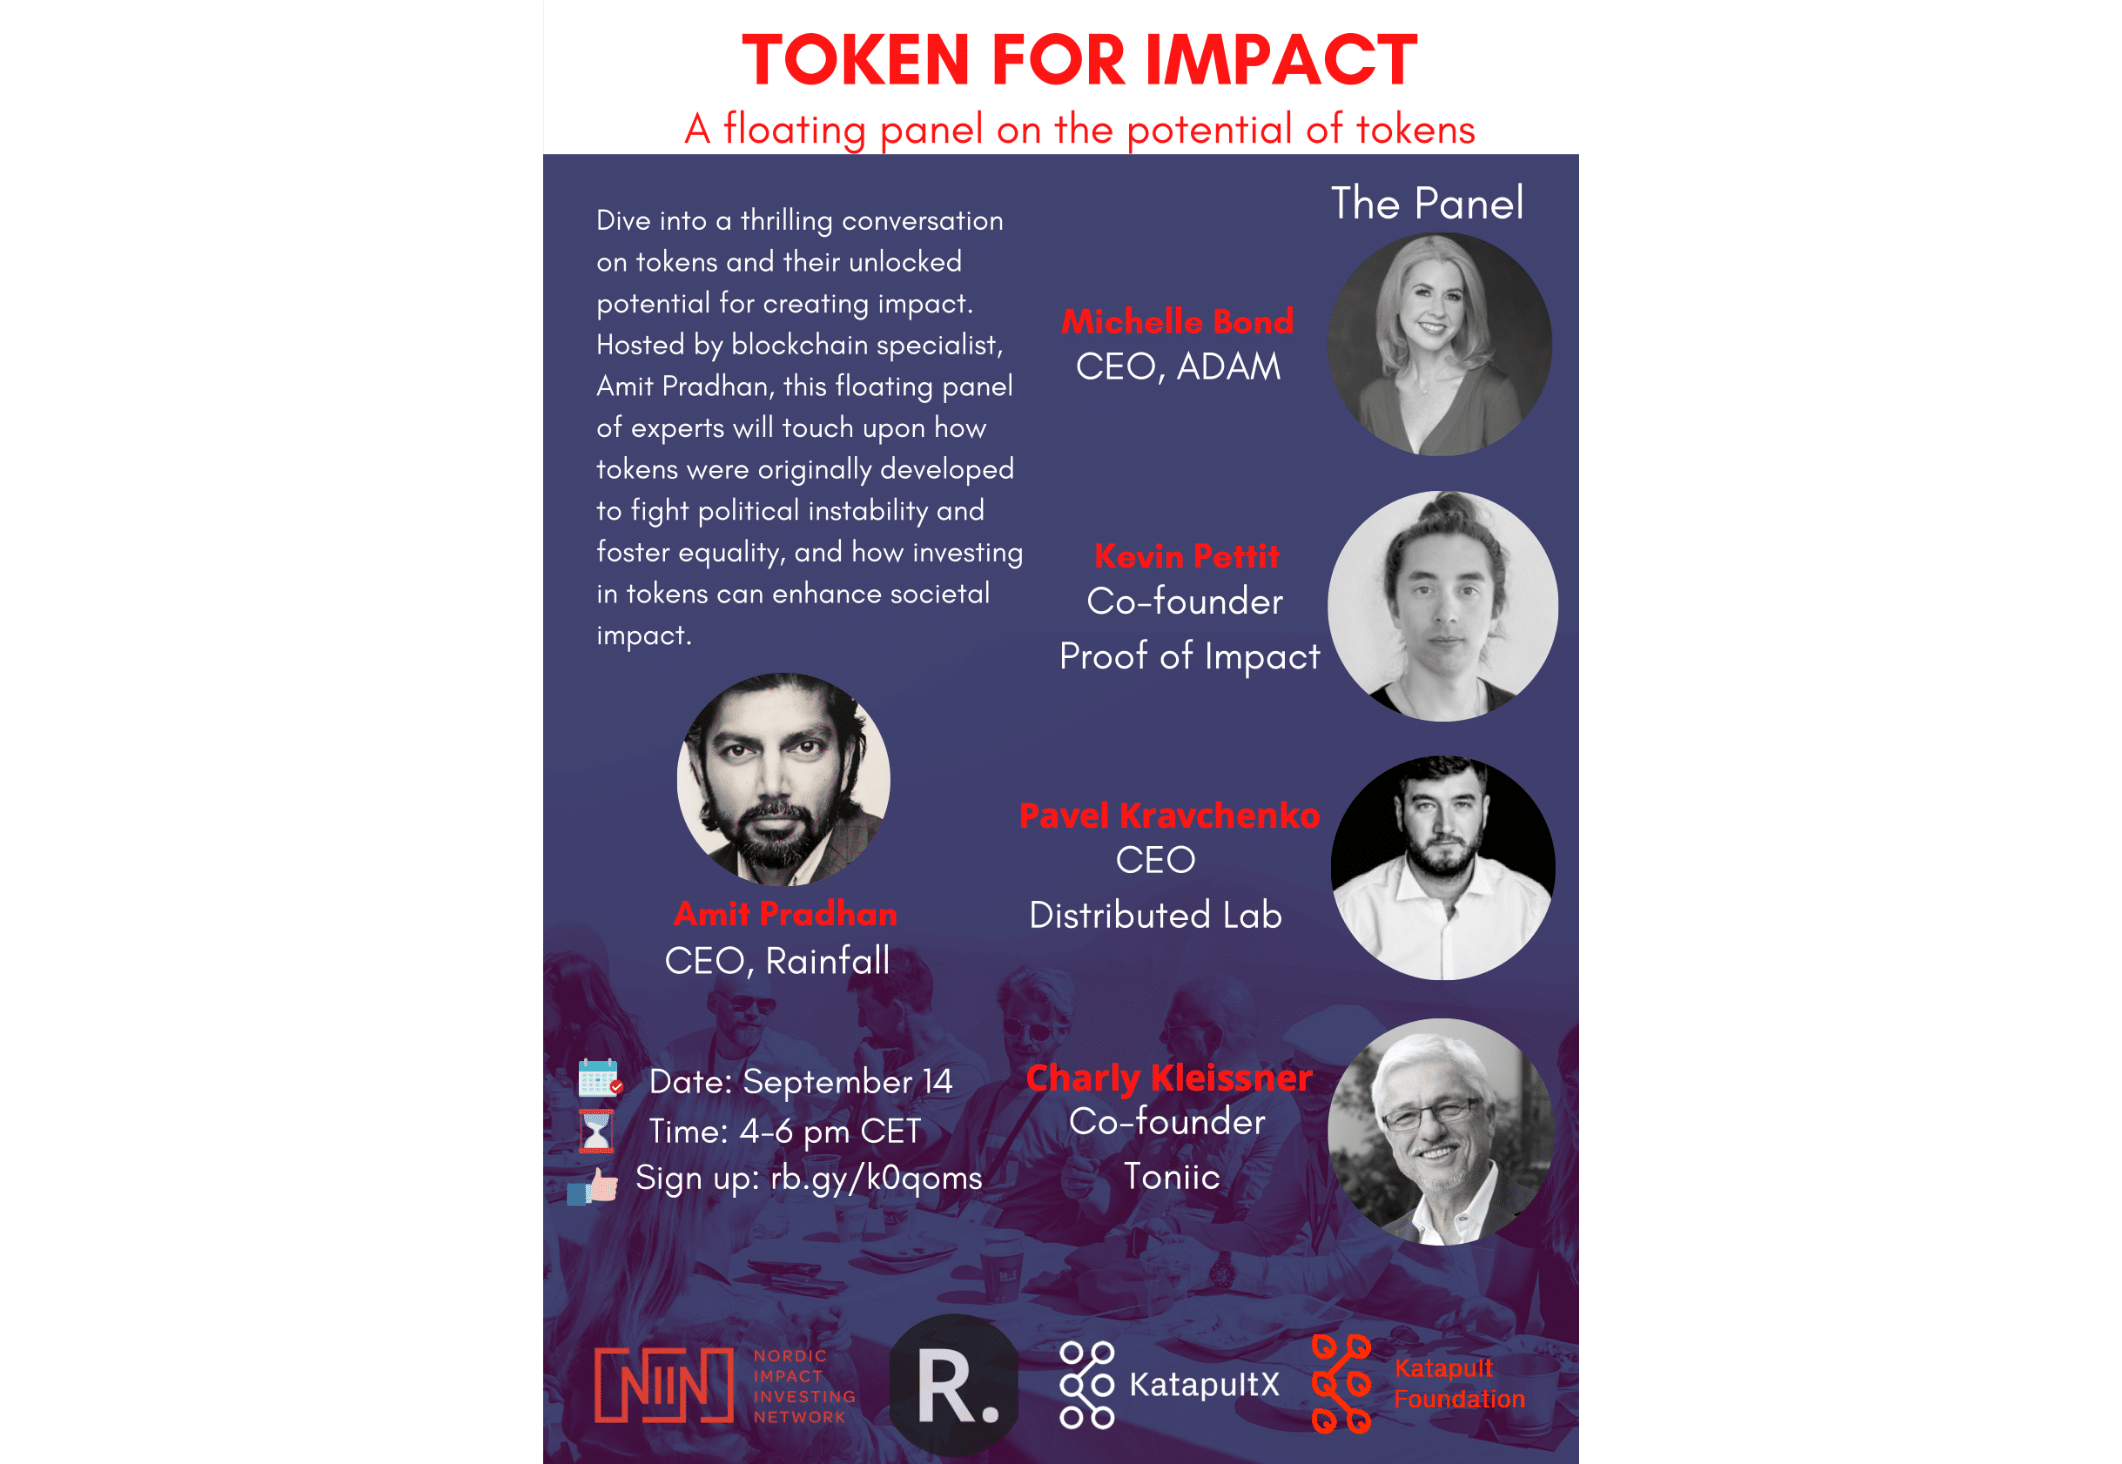 Token for impact investing event bitcoin